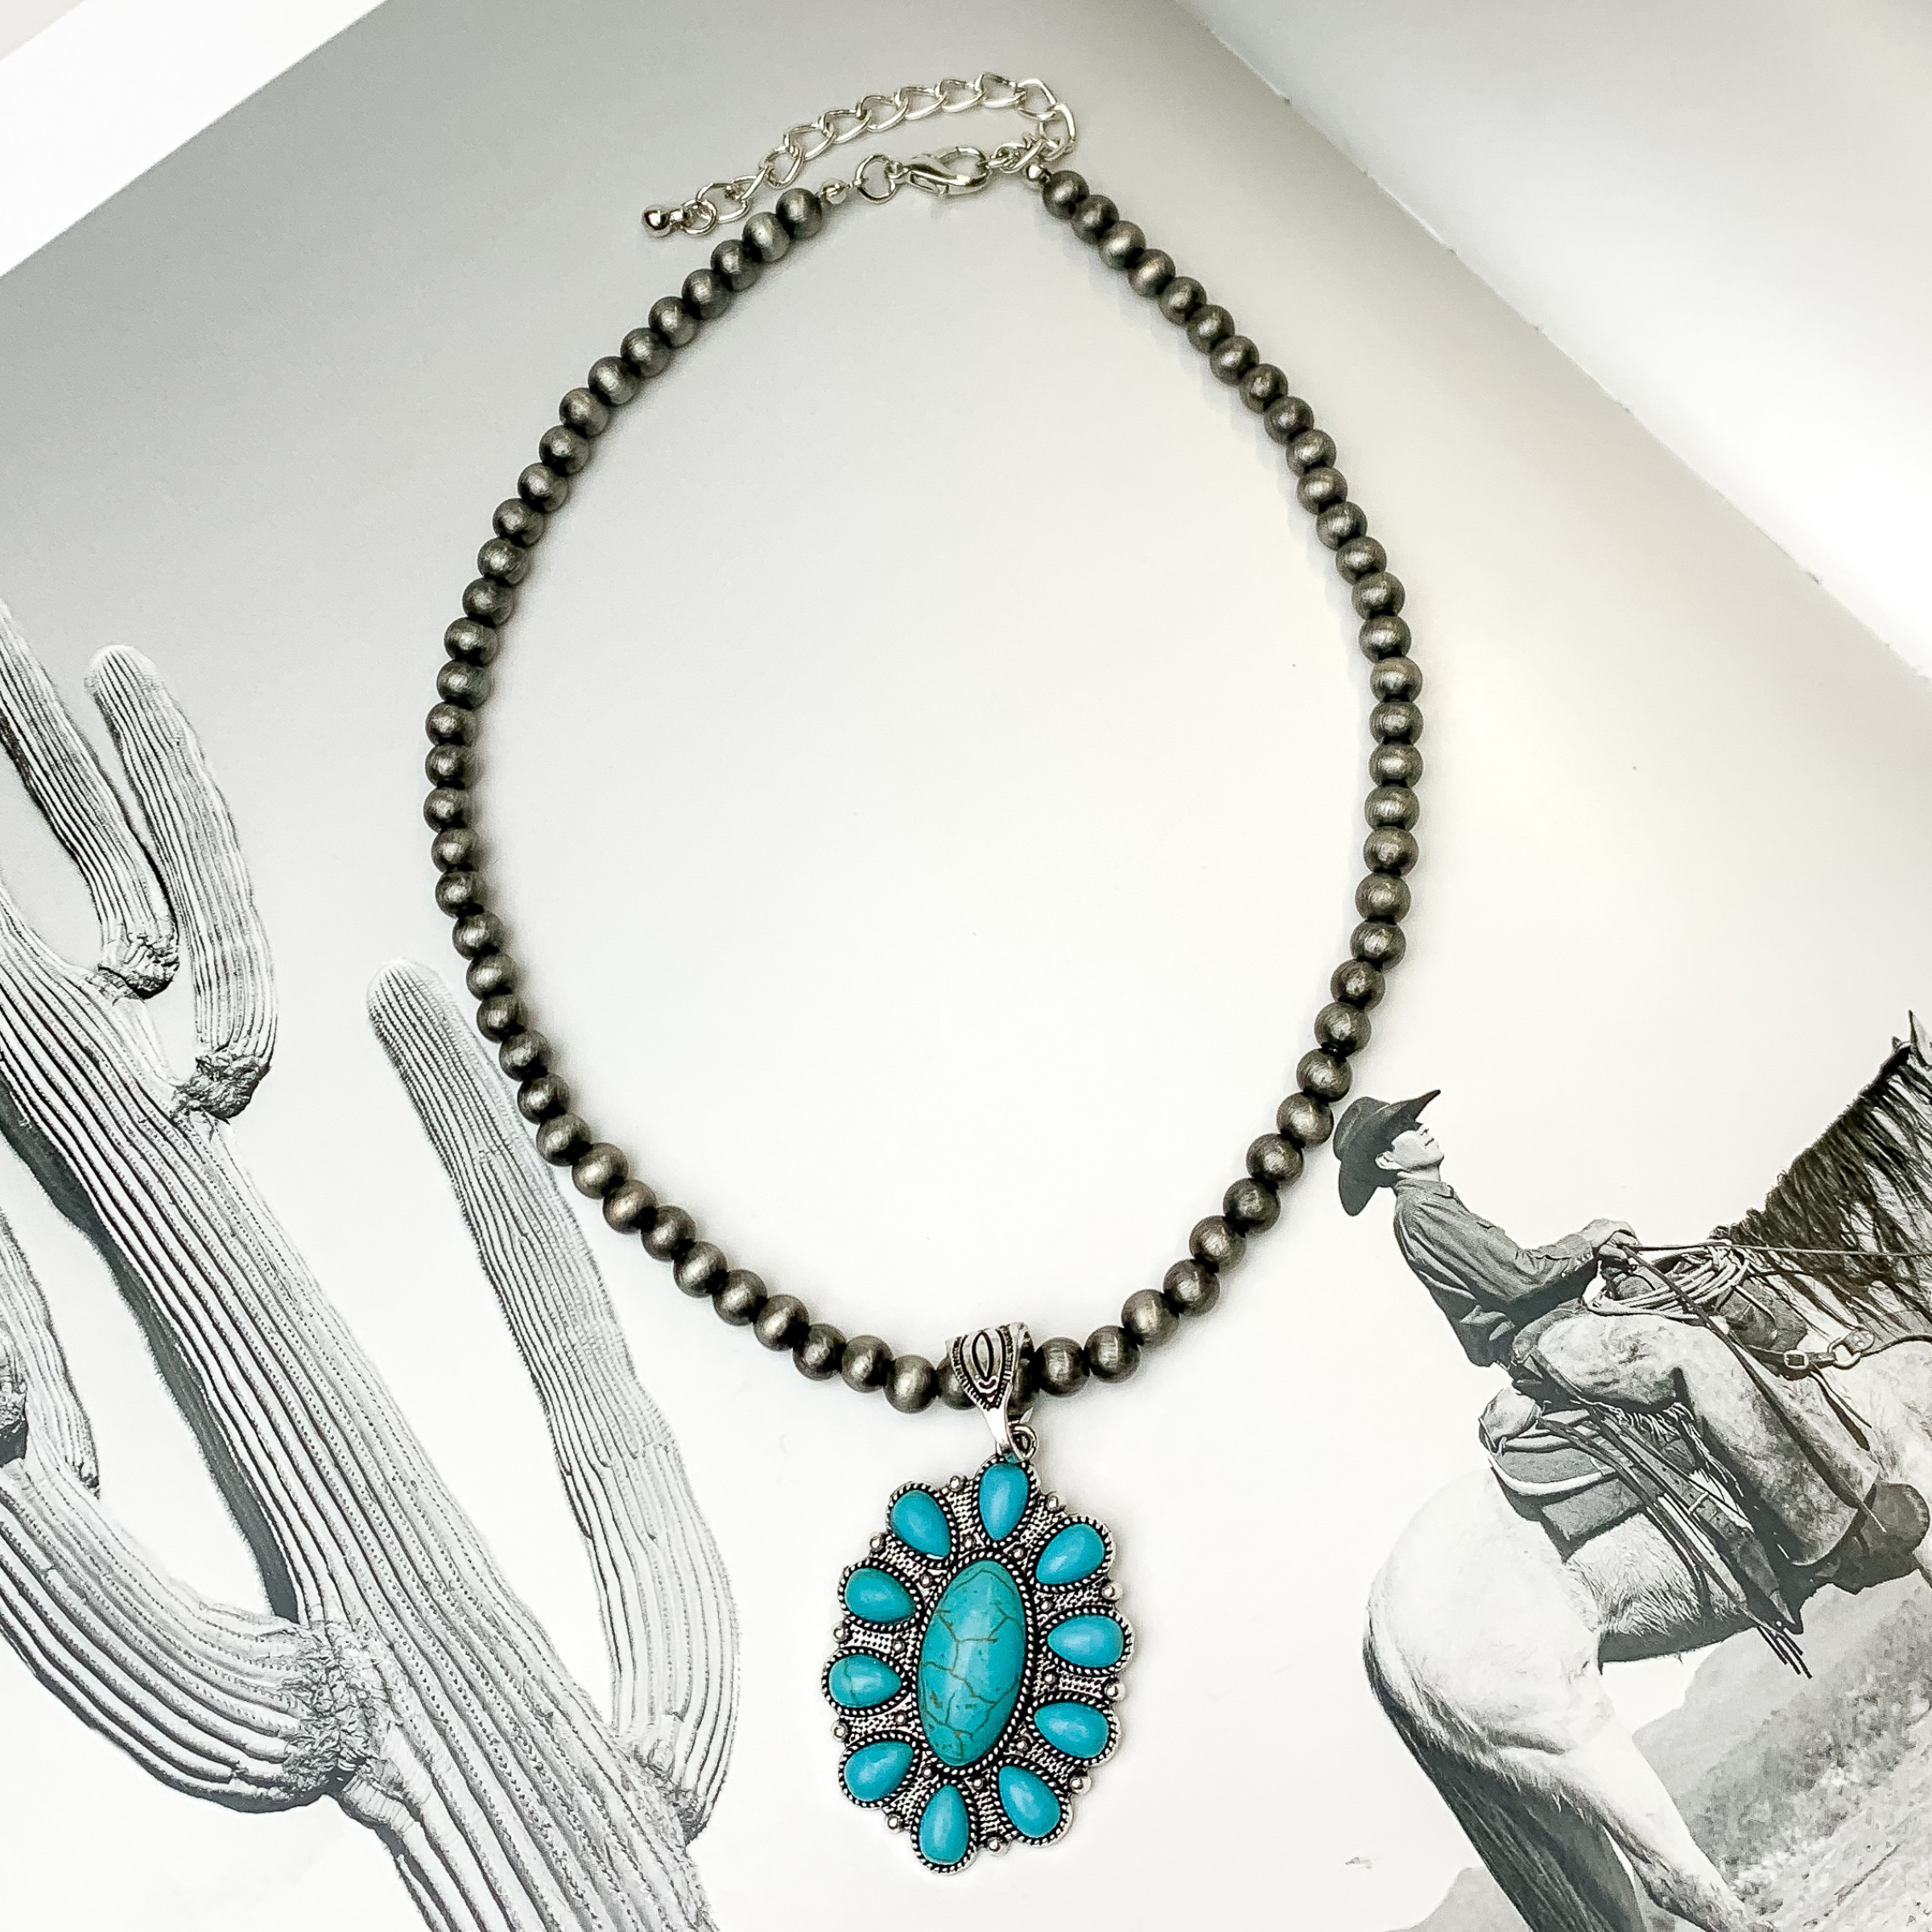 Silver beaded necklace with an oval pendant. This pendant is silver with a turquoise stone design. This necklace is pictured on a black and white picture. 